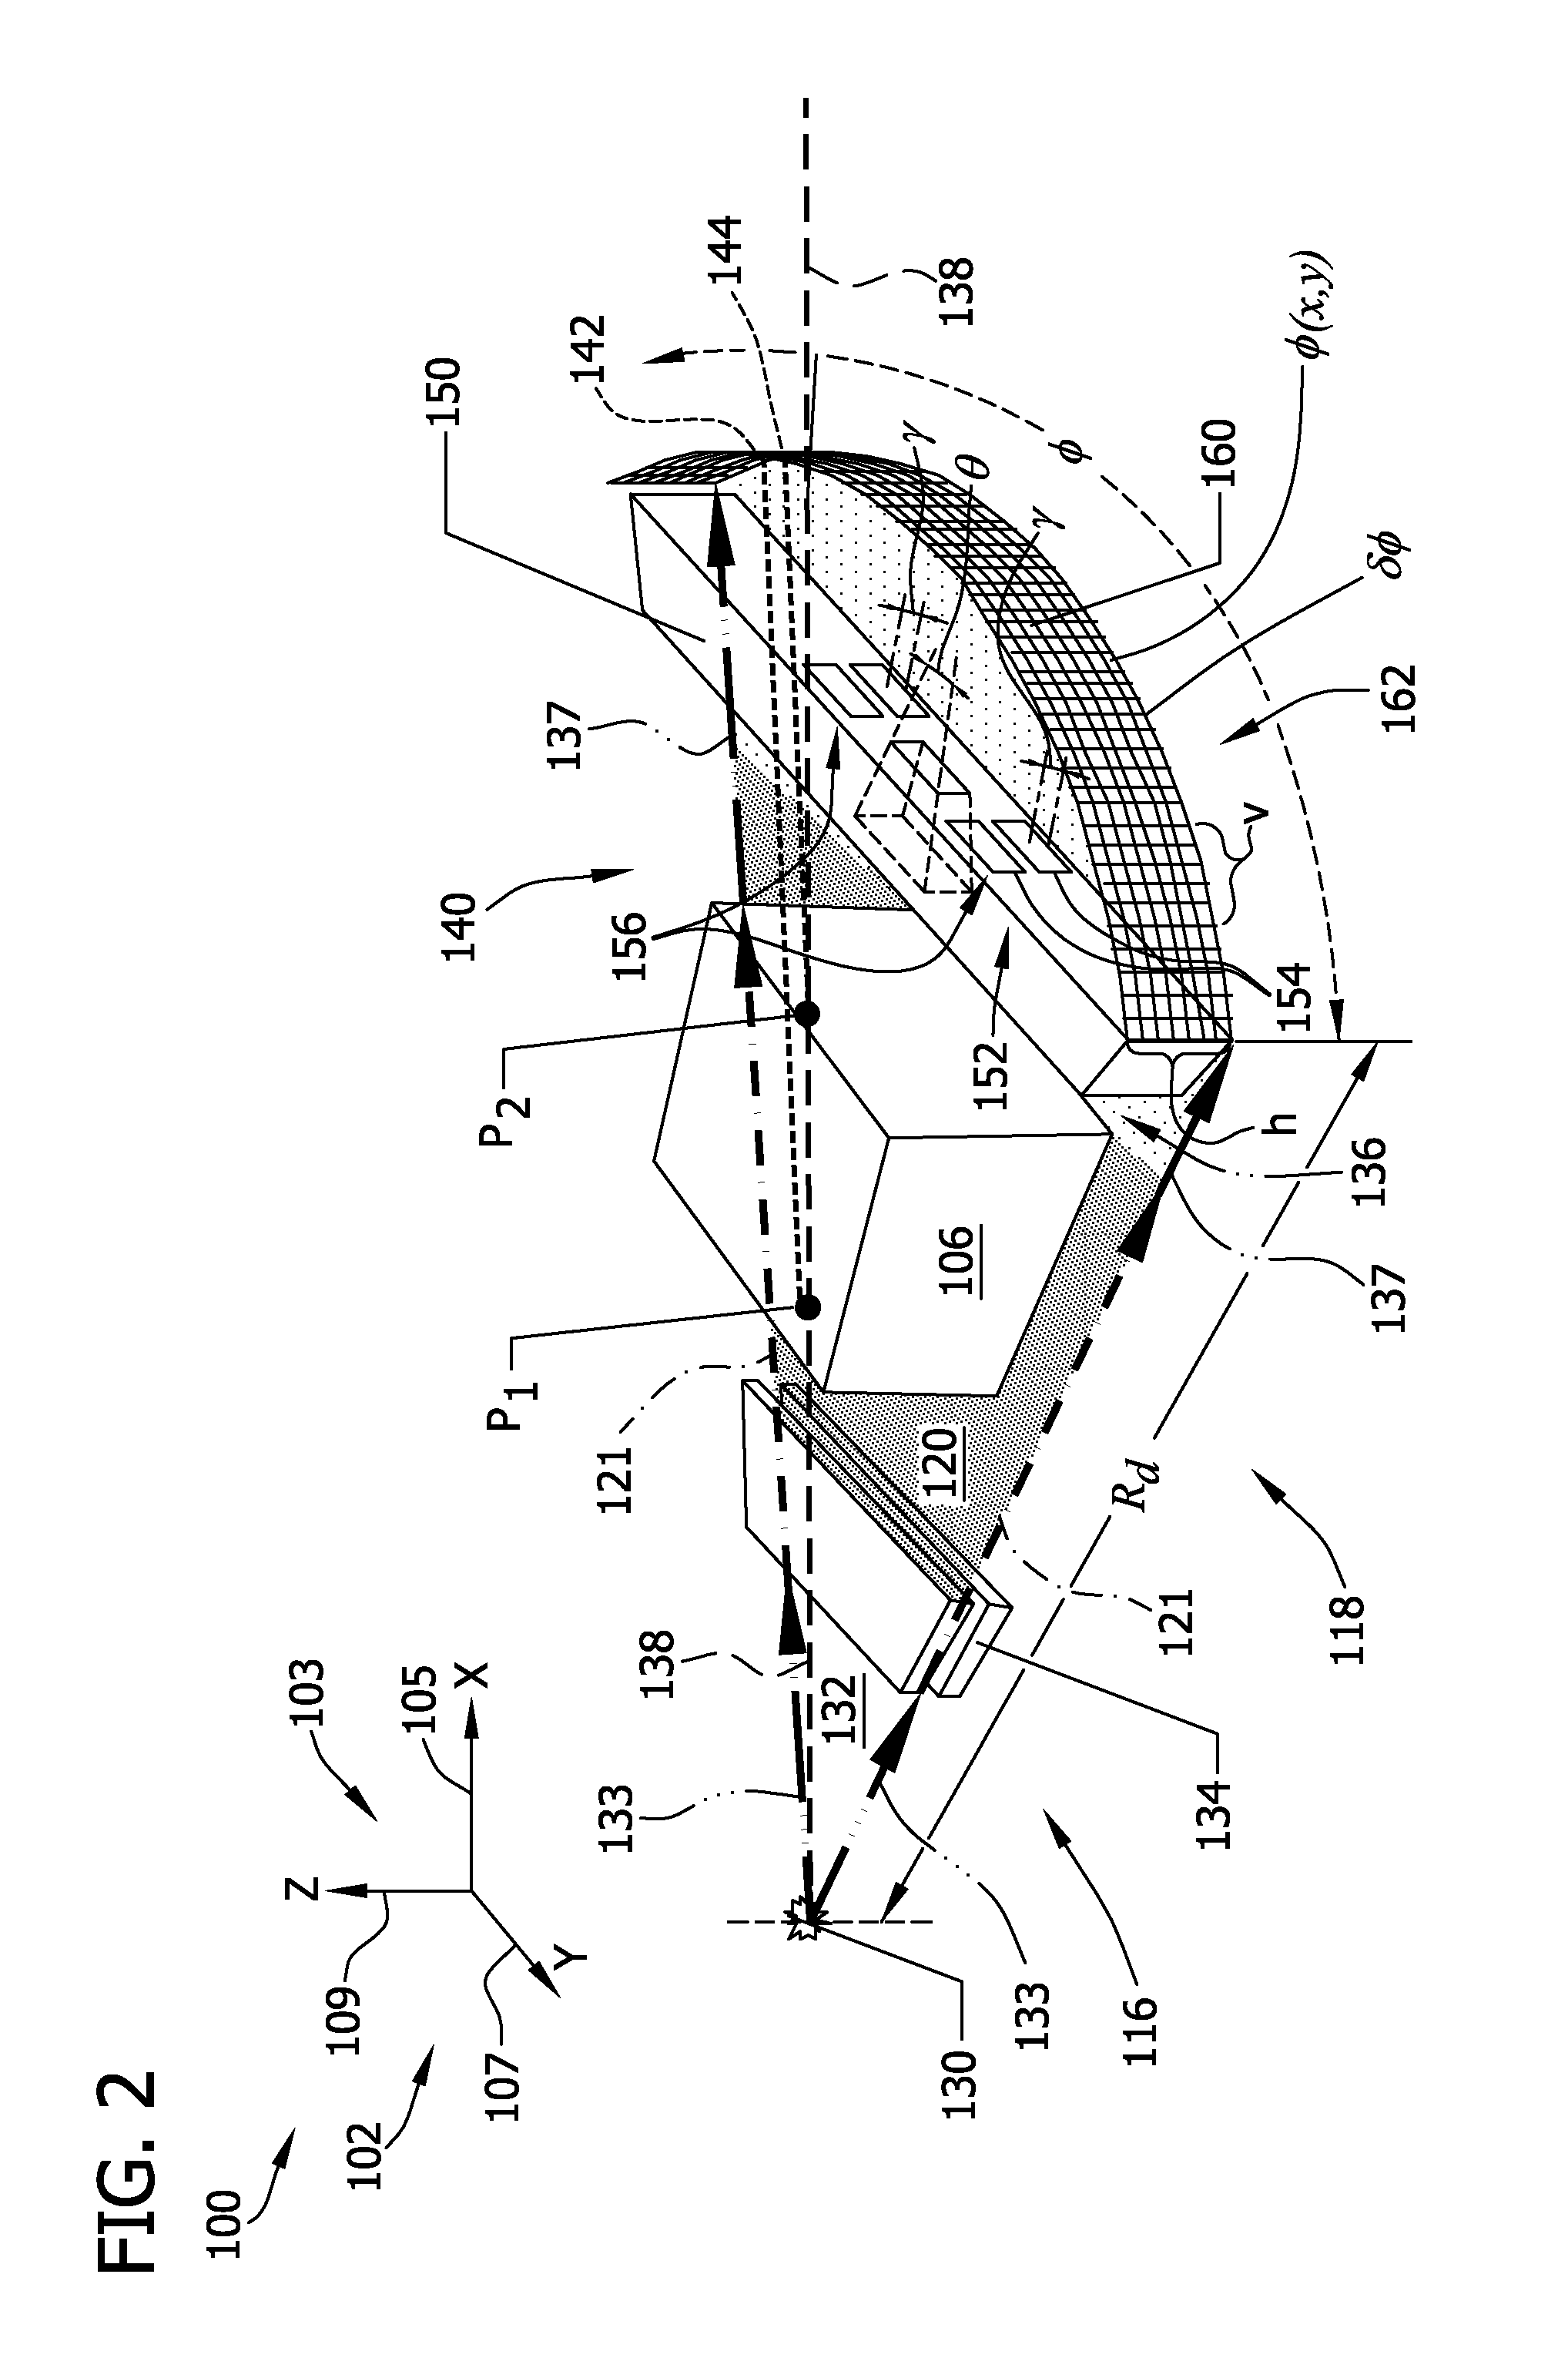 Object imaging system and x-ray diffraction imaging device for a security system